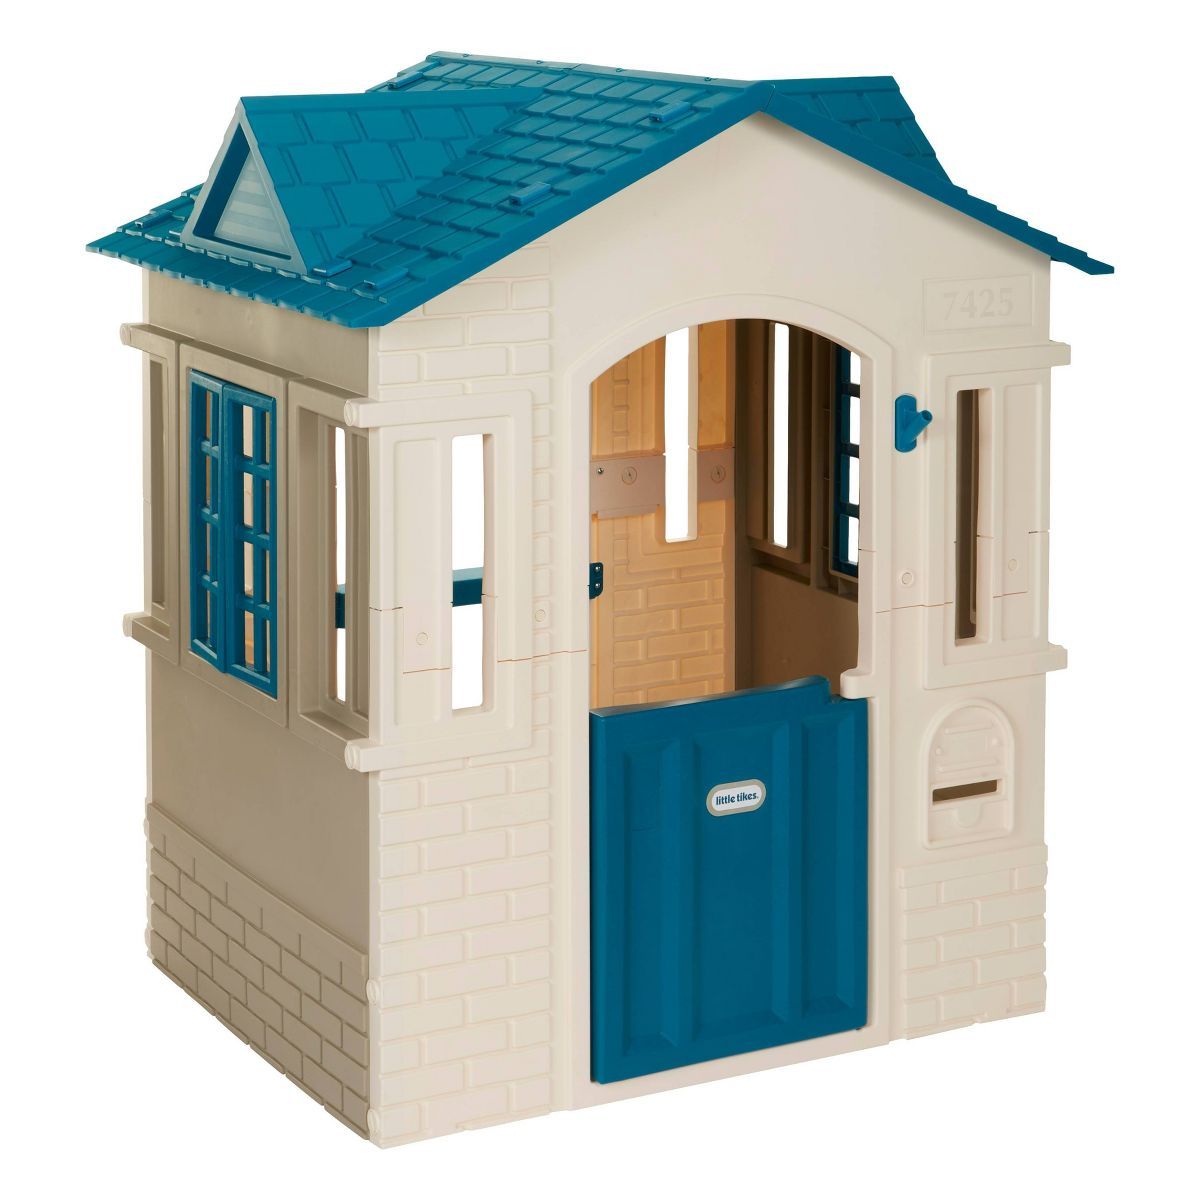 Little Tikes Small Cape Cottage Refresh Playhouse - Blue | Target